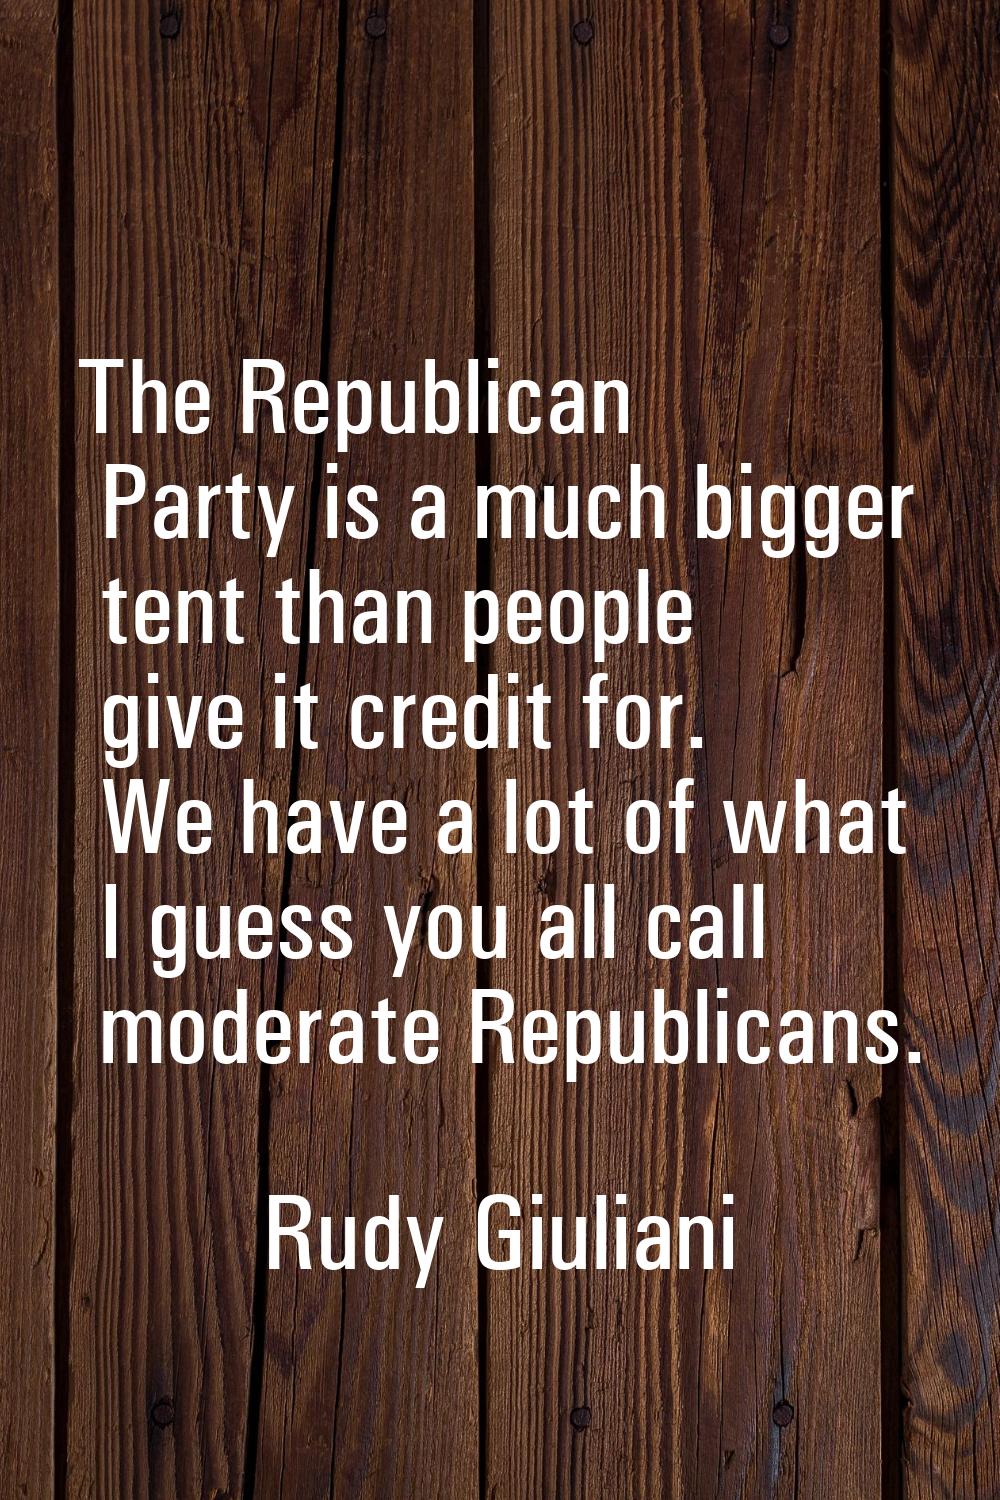 The Republican Party is a much bigger tent than people give it credit for. We have a lot of what I 